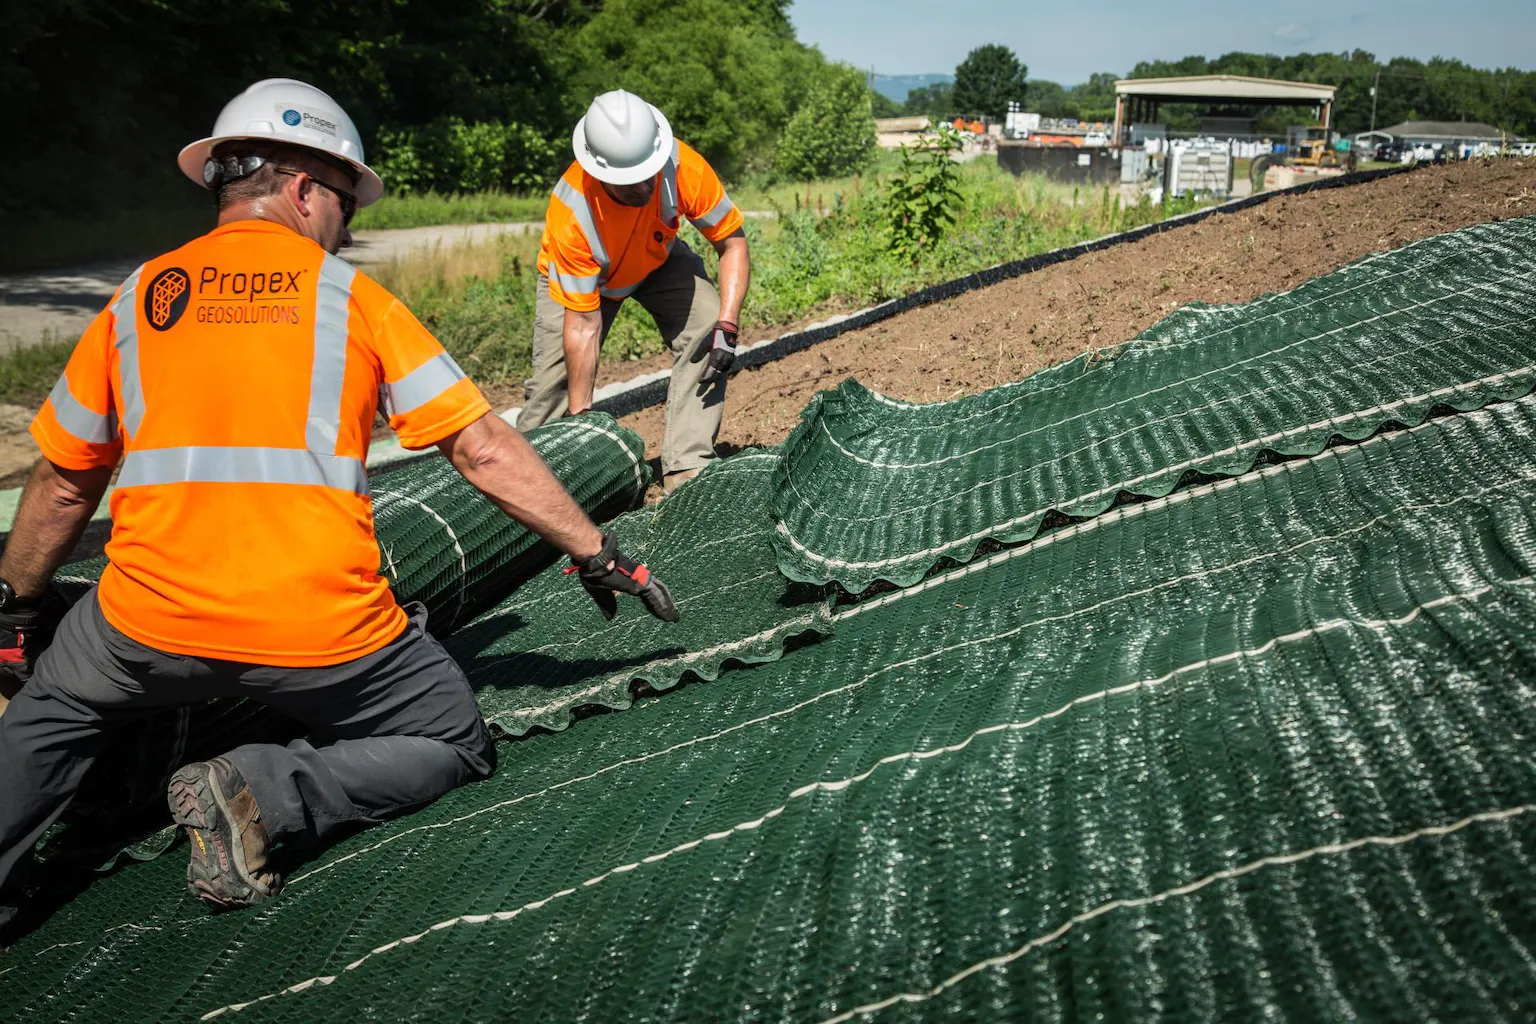  Proper estimation of erosion control materials like blankets and mats for slopes and channels is crucial to avoid underestimation that leads to project delays and increased costs. The approach includes accounting for 3D measurements, overlaps, and wastage